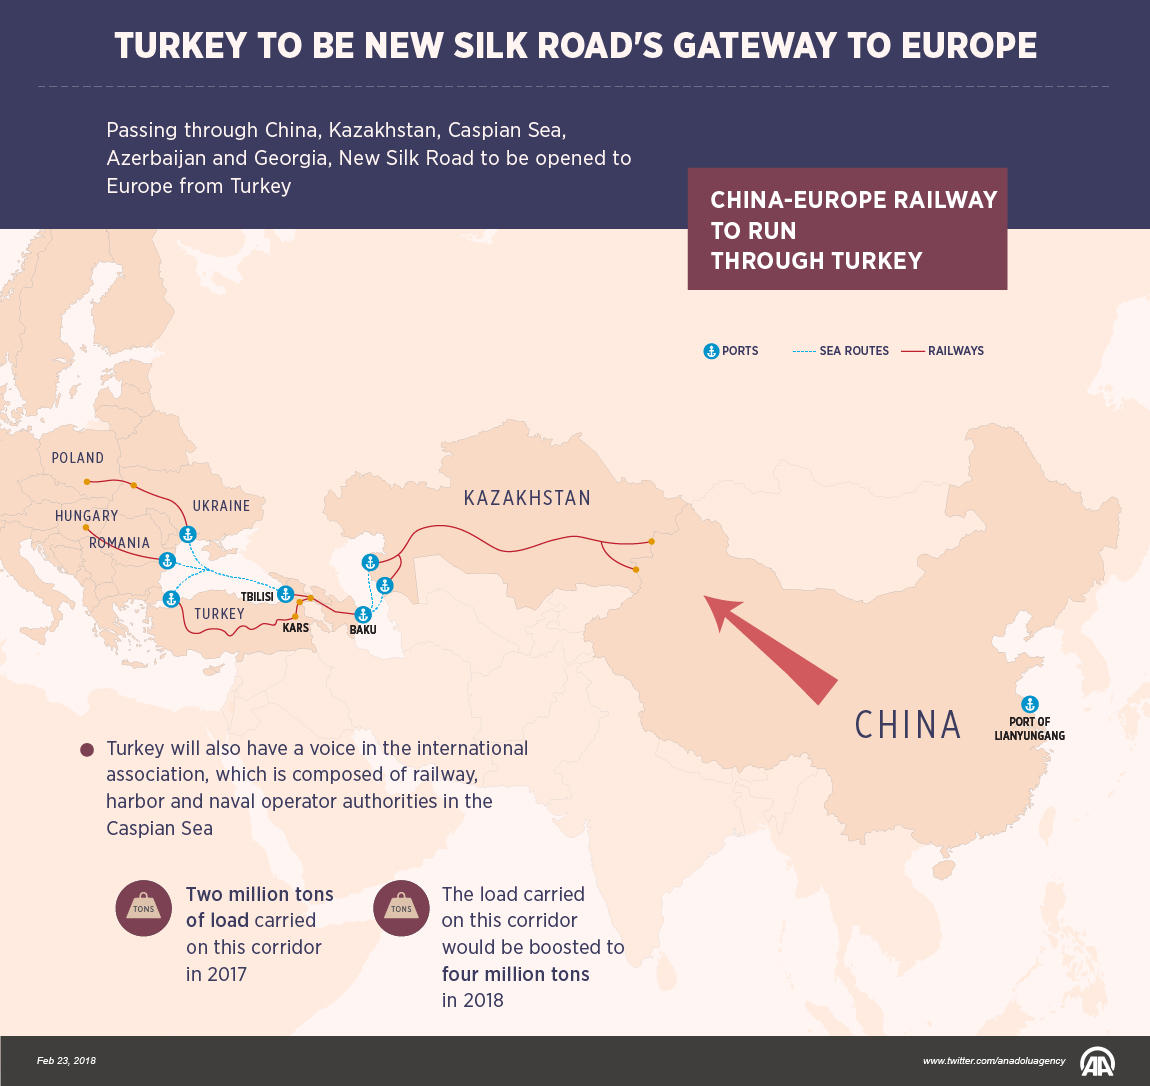 Turkey to be New Silk Road's gateway to Europe